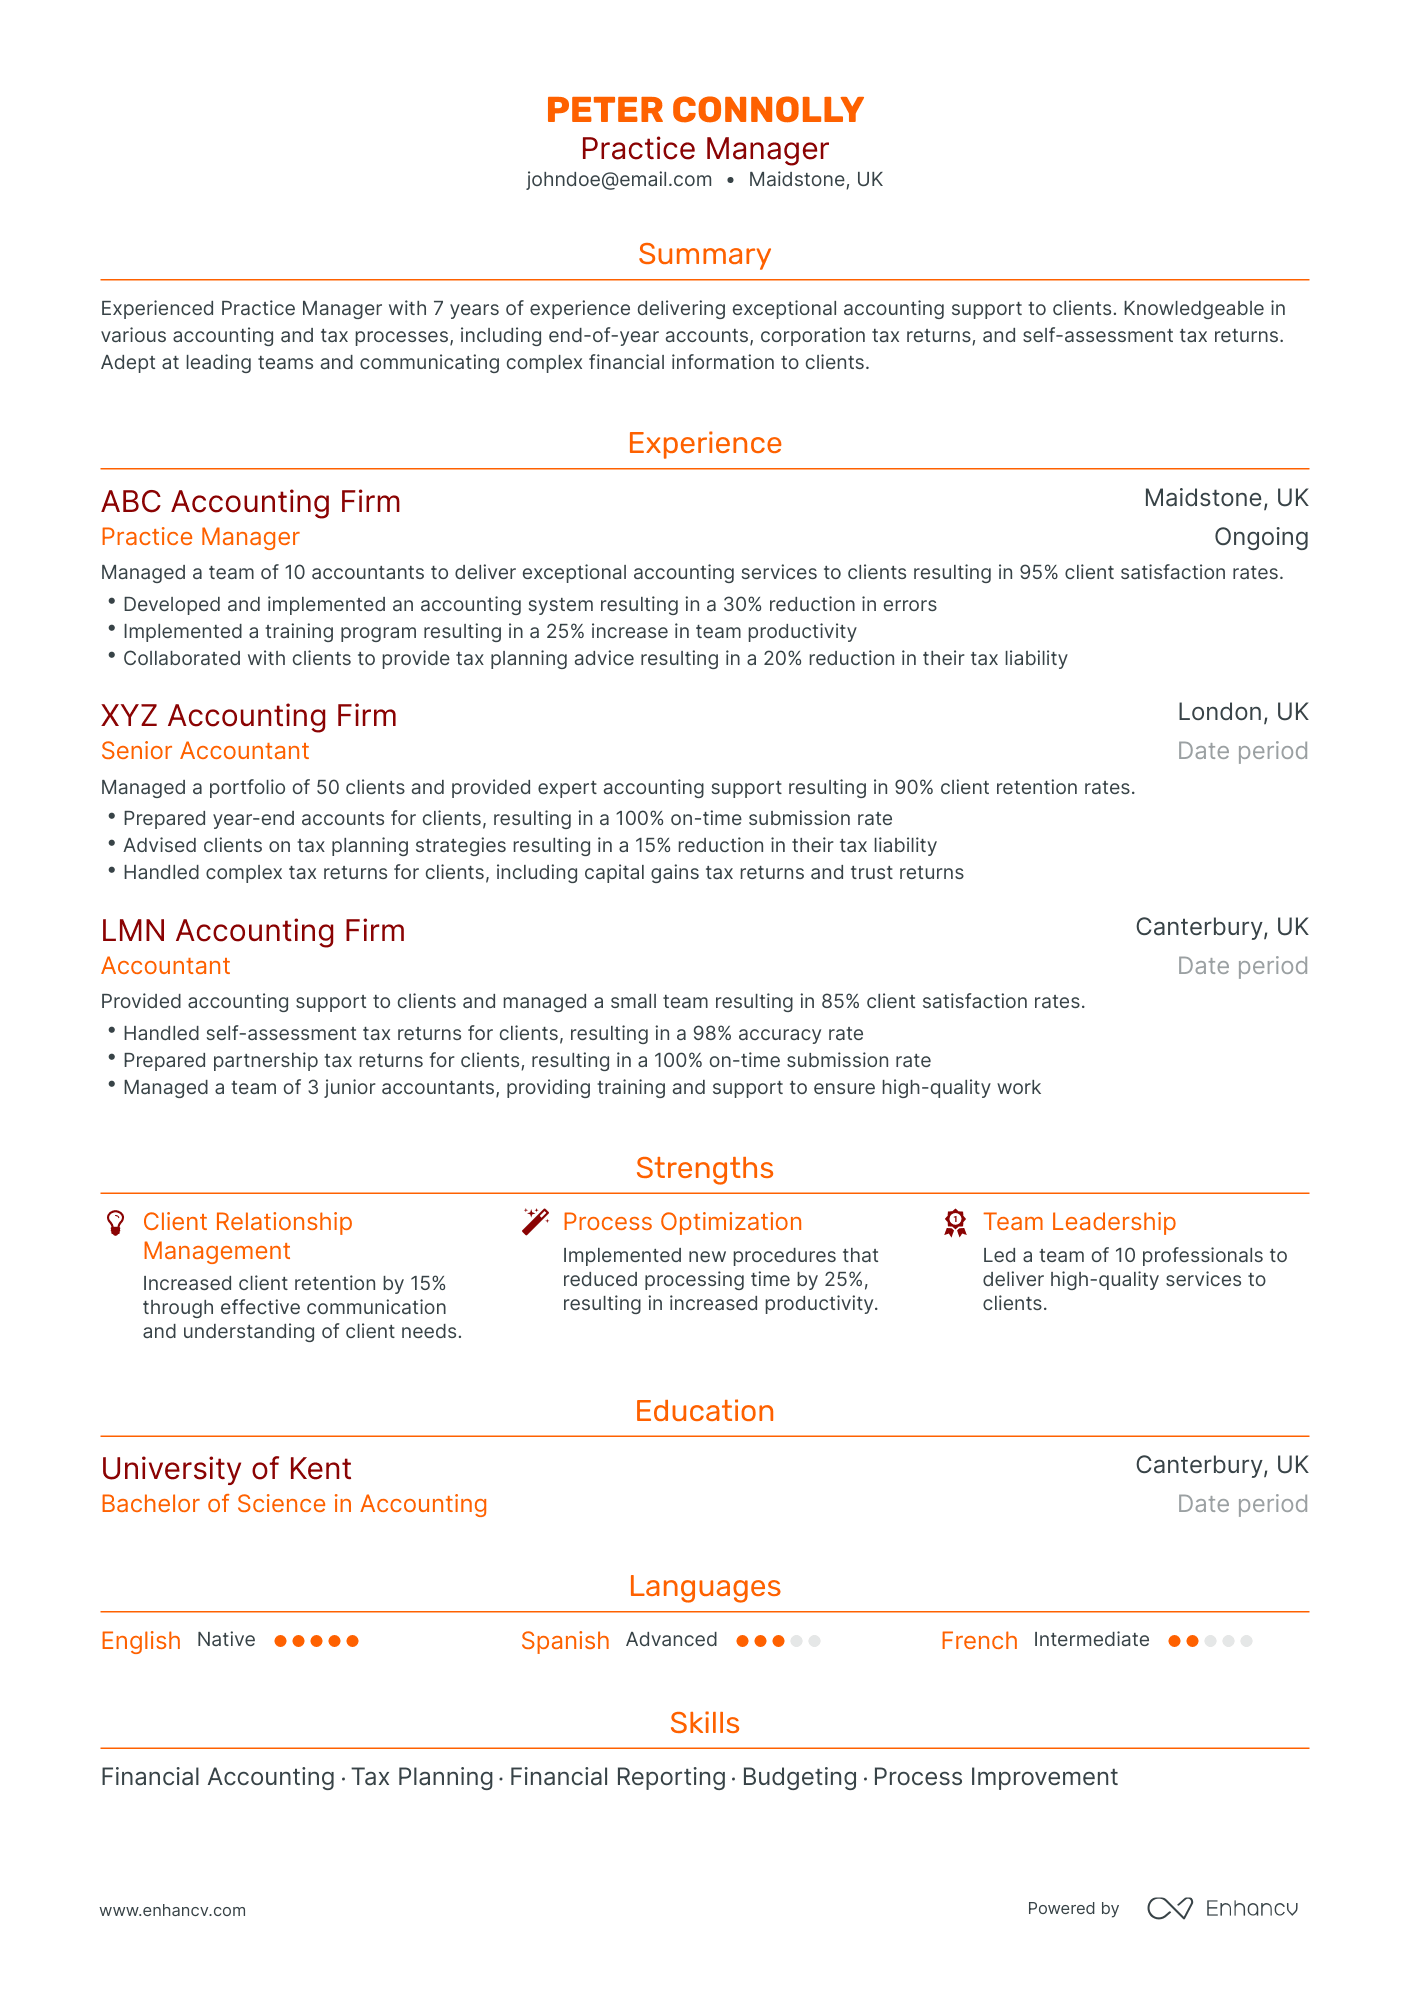 Traditional Practice Manager Resume Template